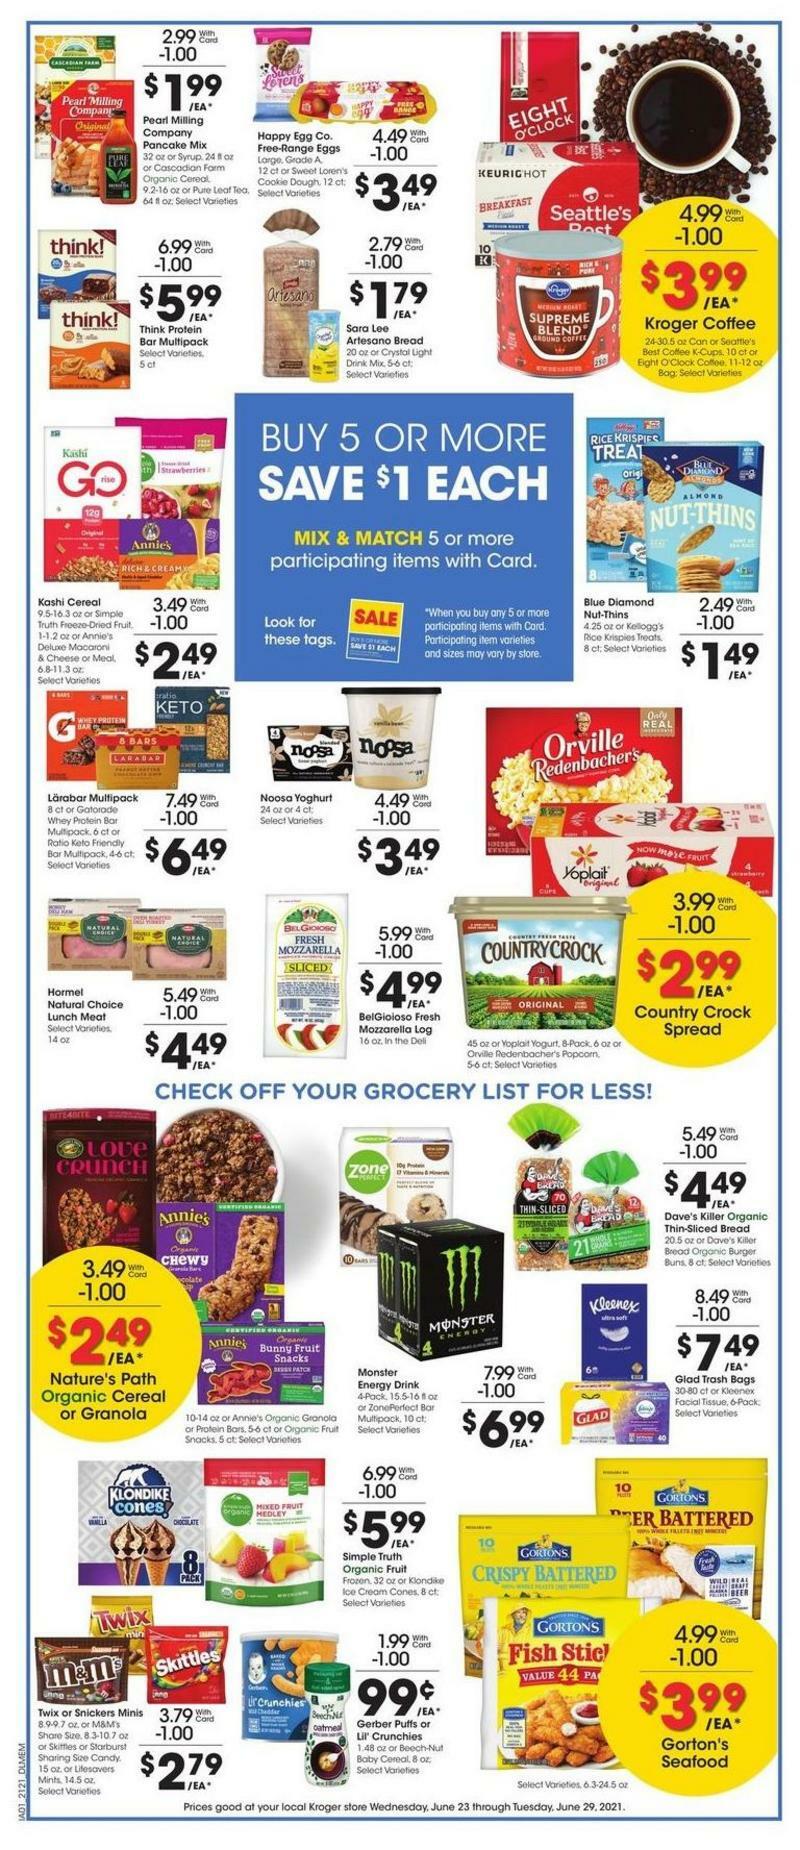 Kroger Weekly Ads & Special Buys from June 23 - Page 3